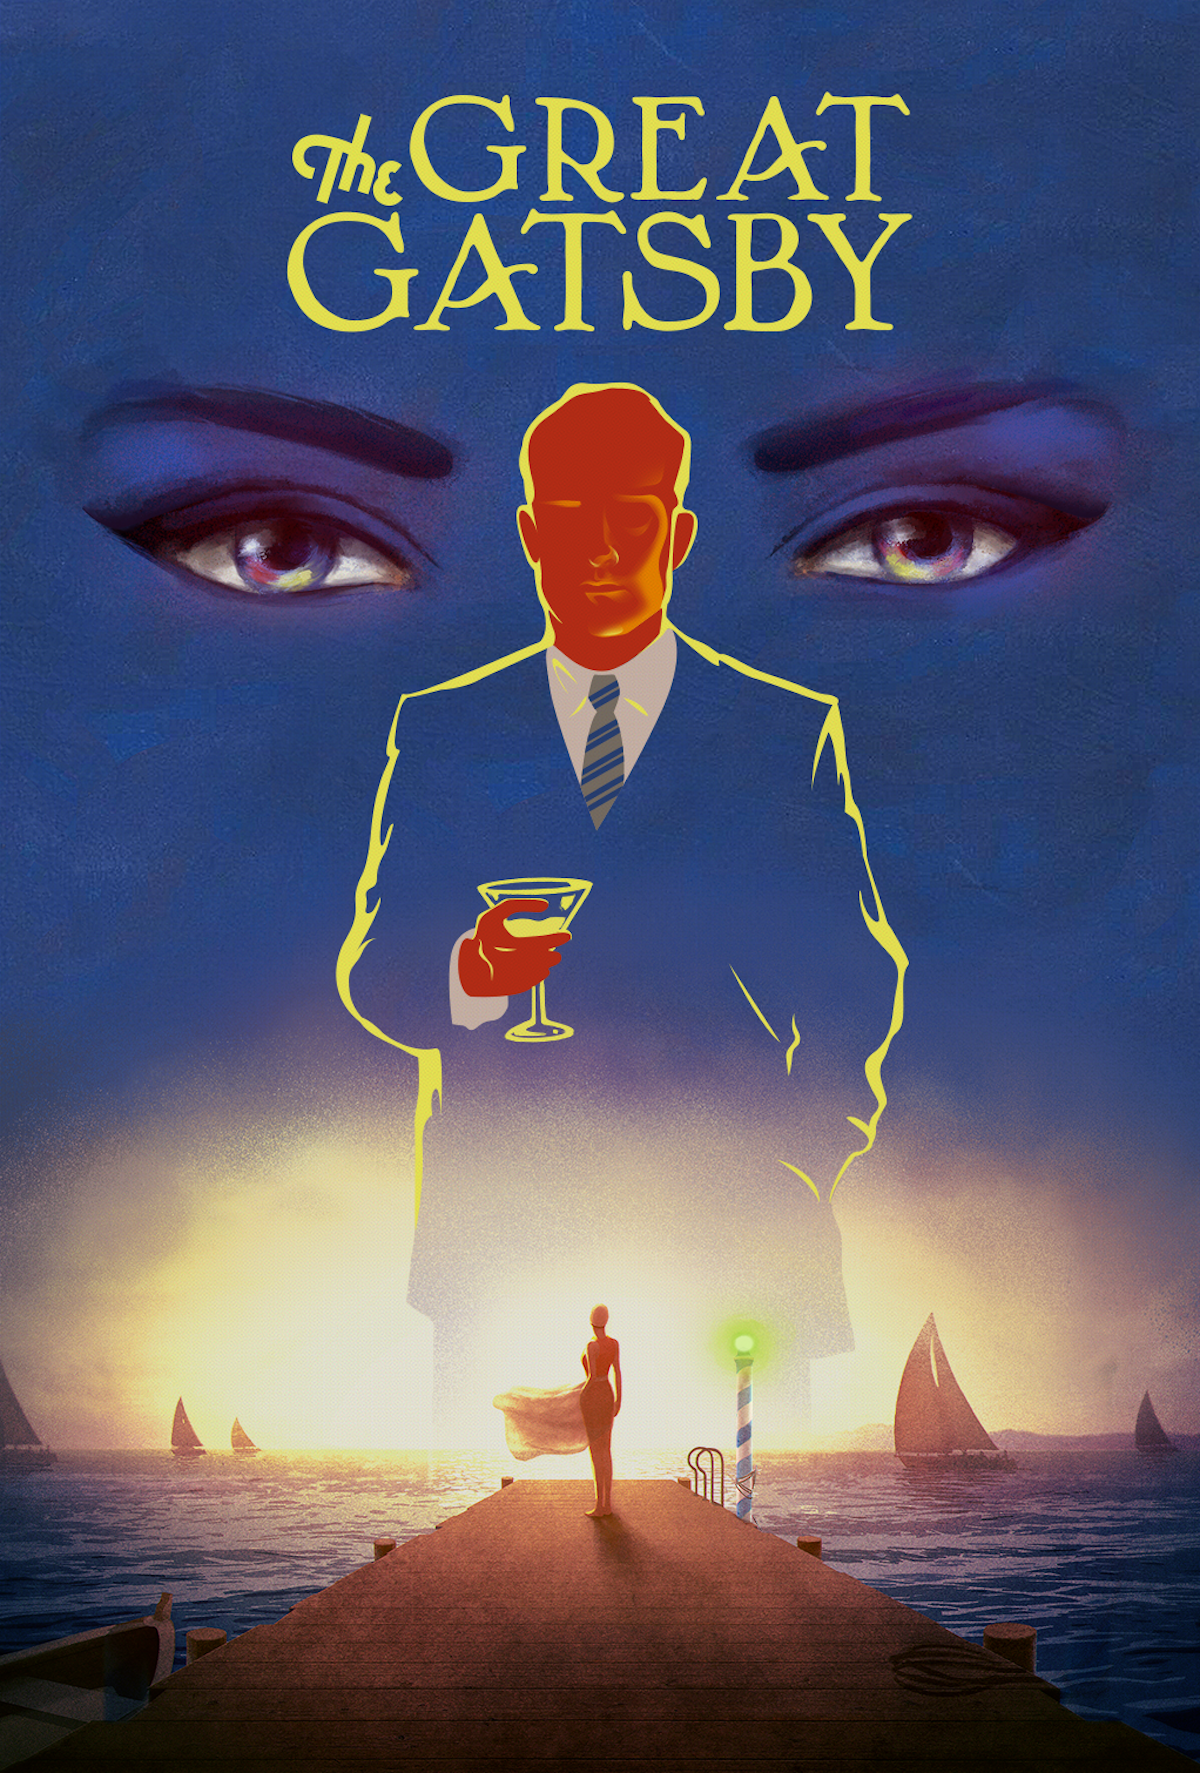 A still from The Great Gatsby animated movie